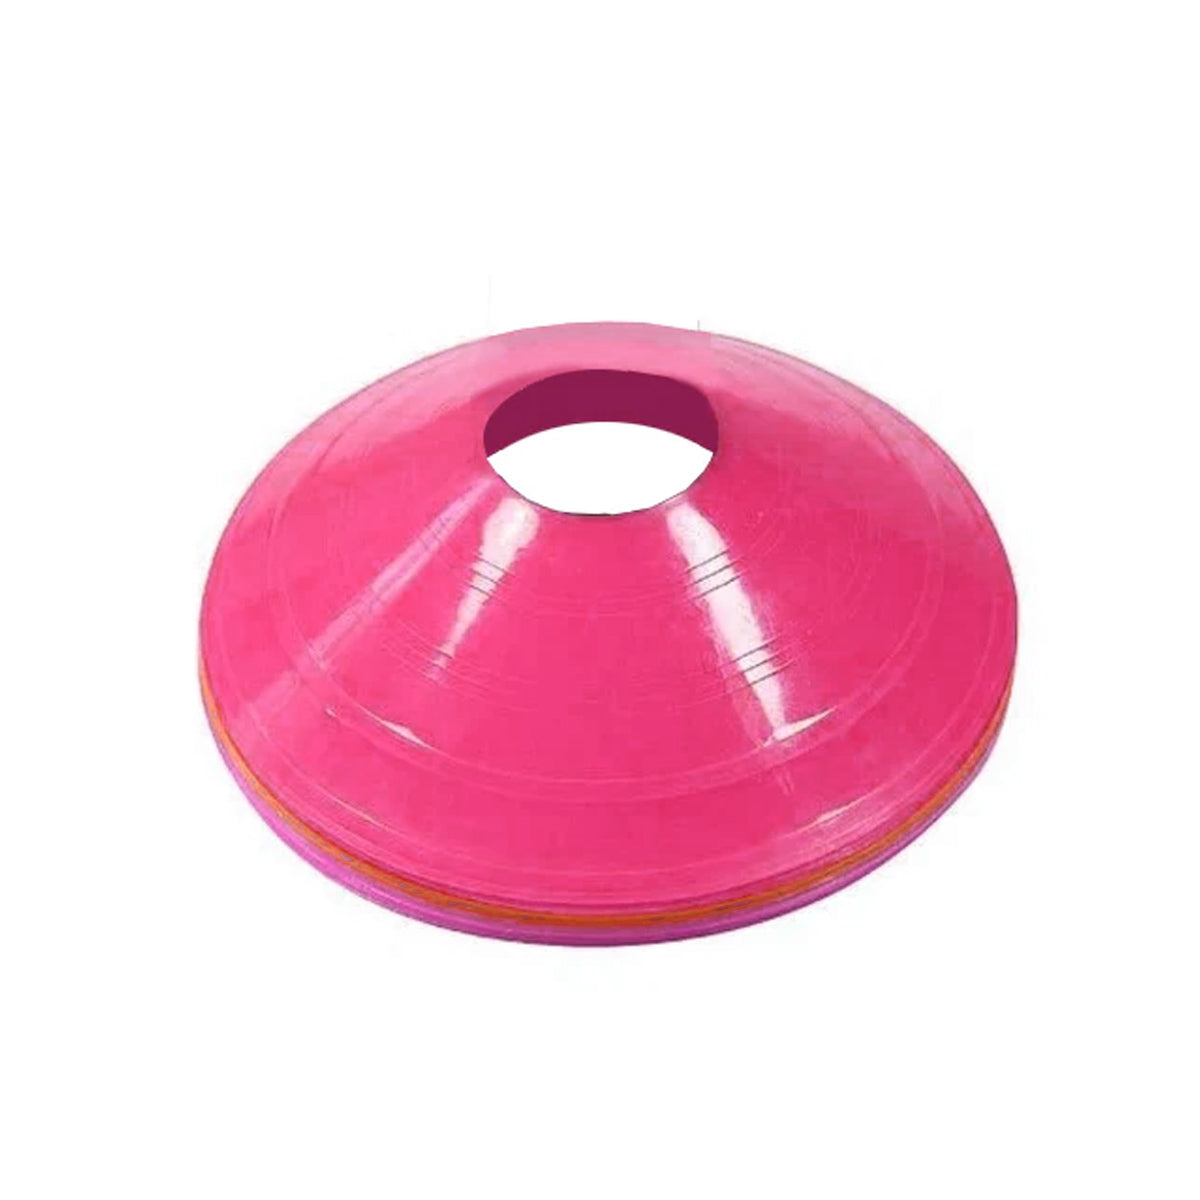 Field Marker Dome - 10 Pack